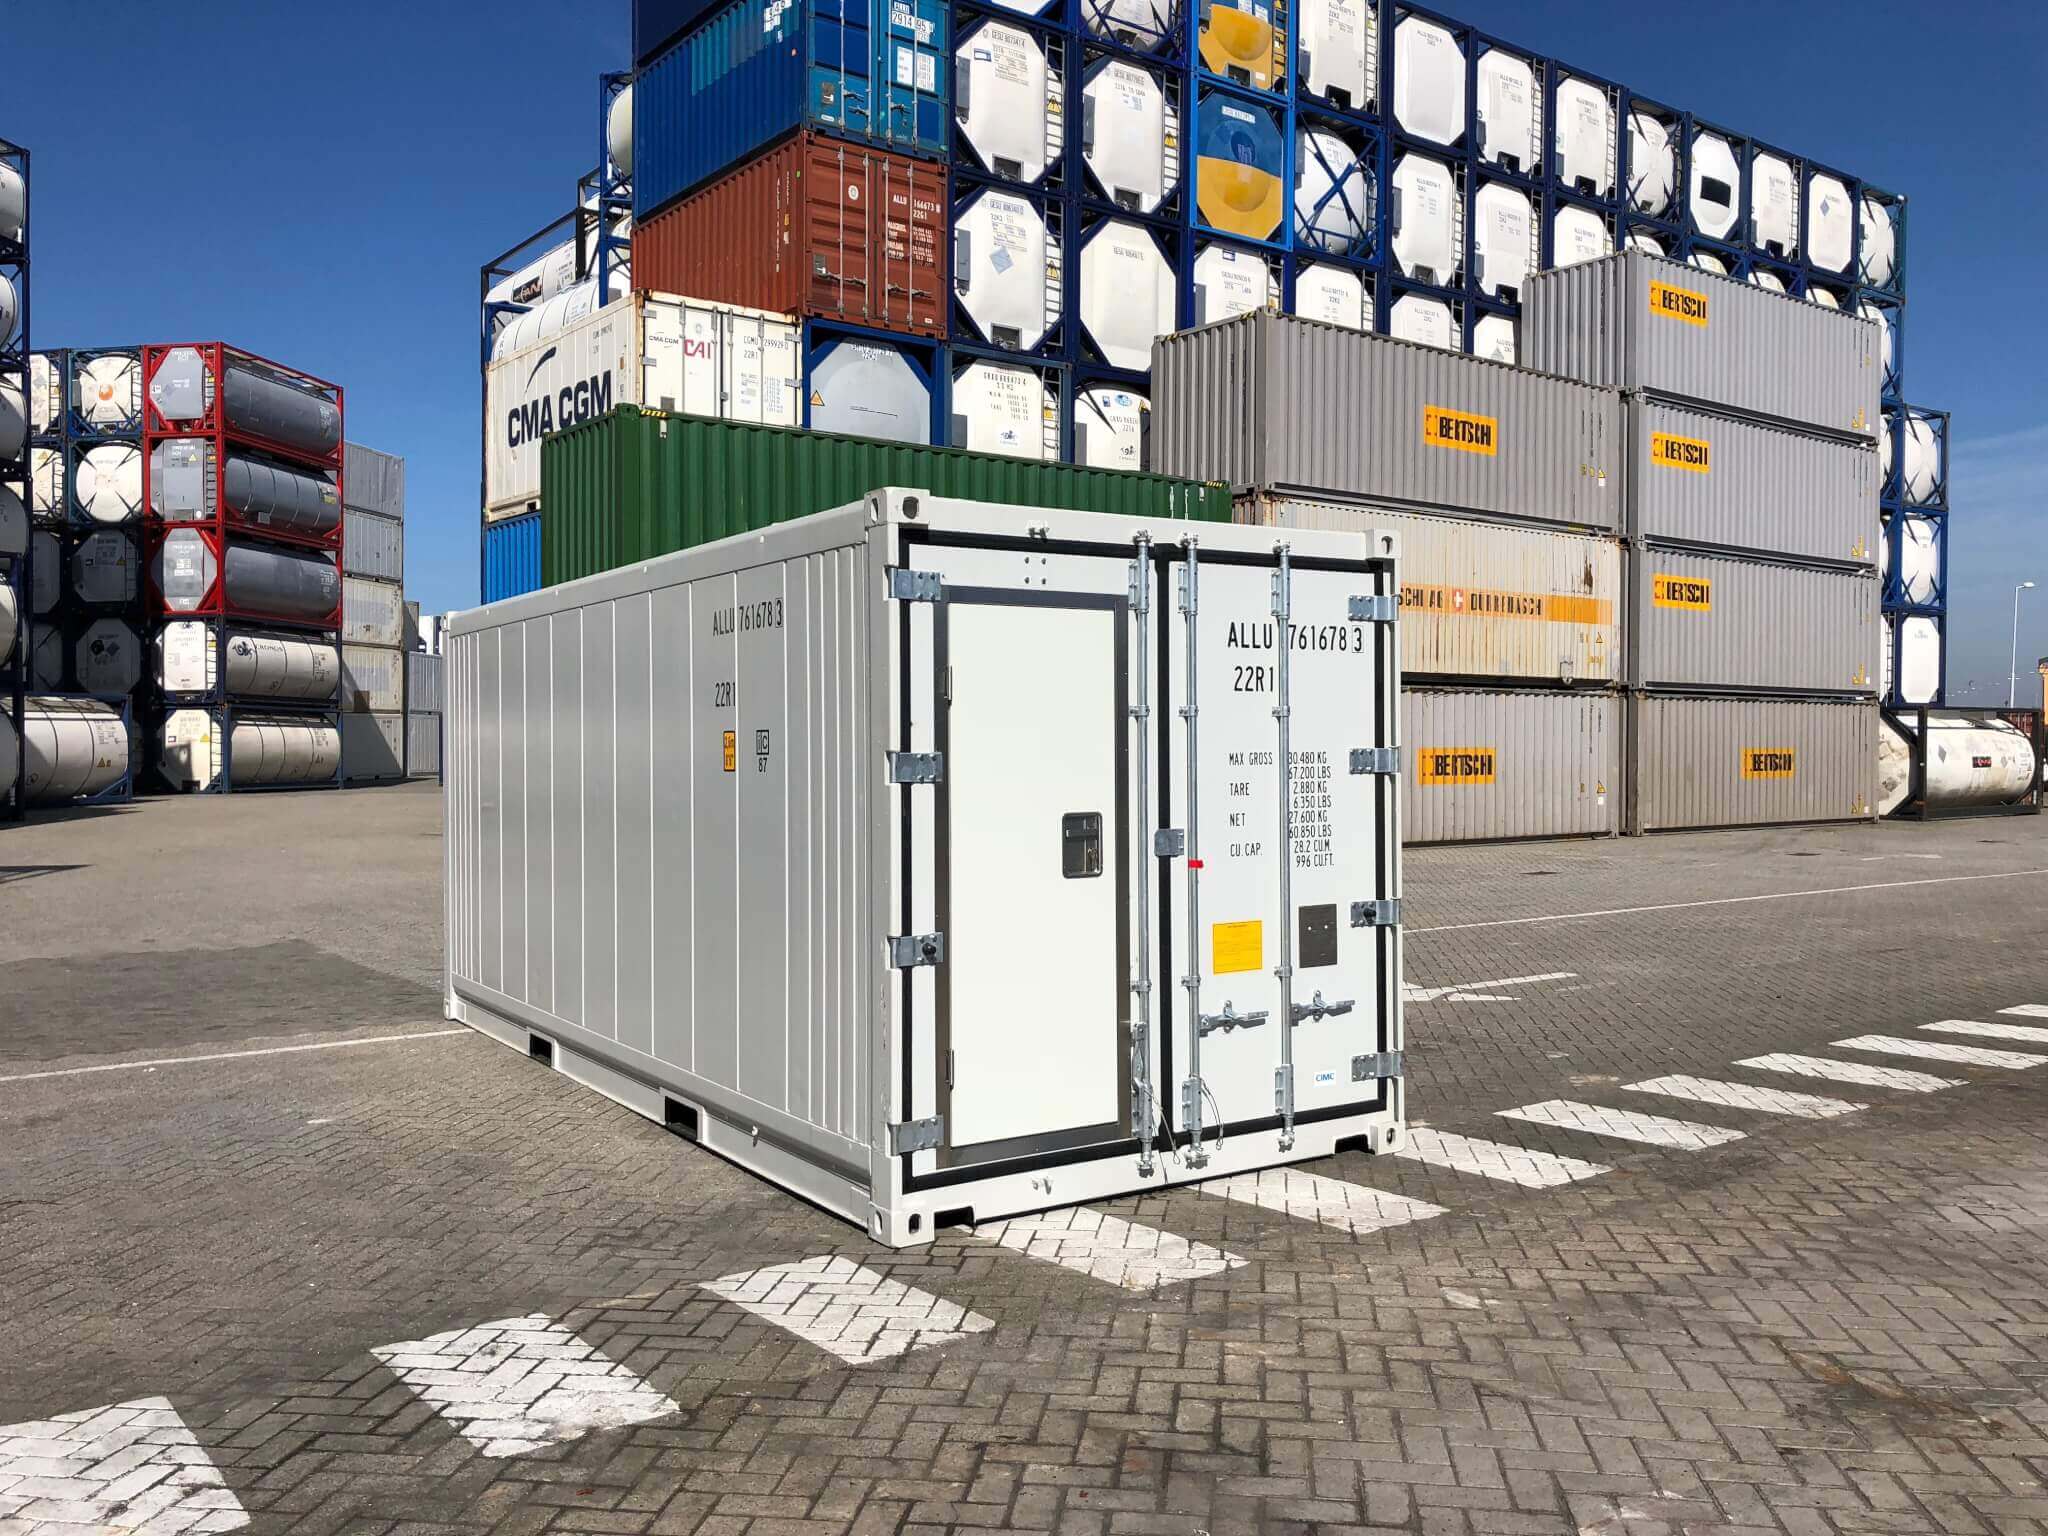 Hire refrigerated container for more cooling capacity